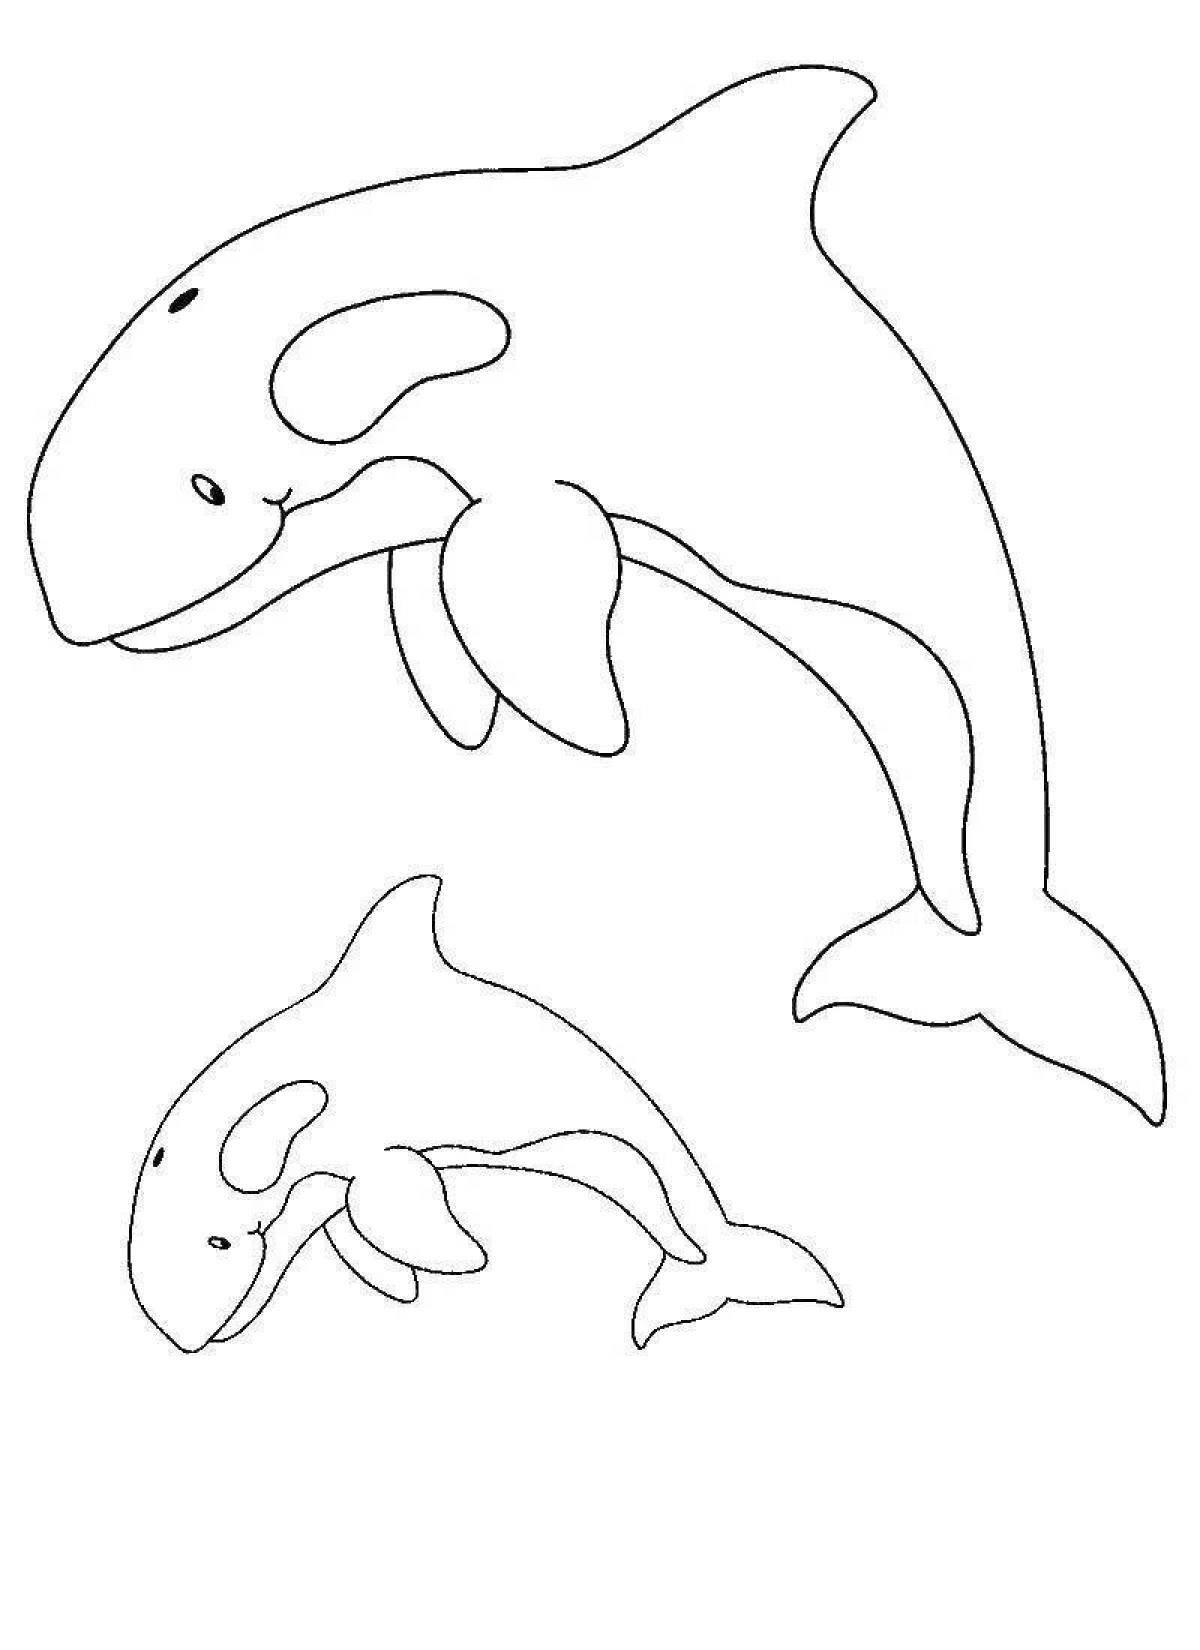 Luminous killer whale coloring book for kids